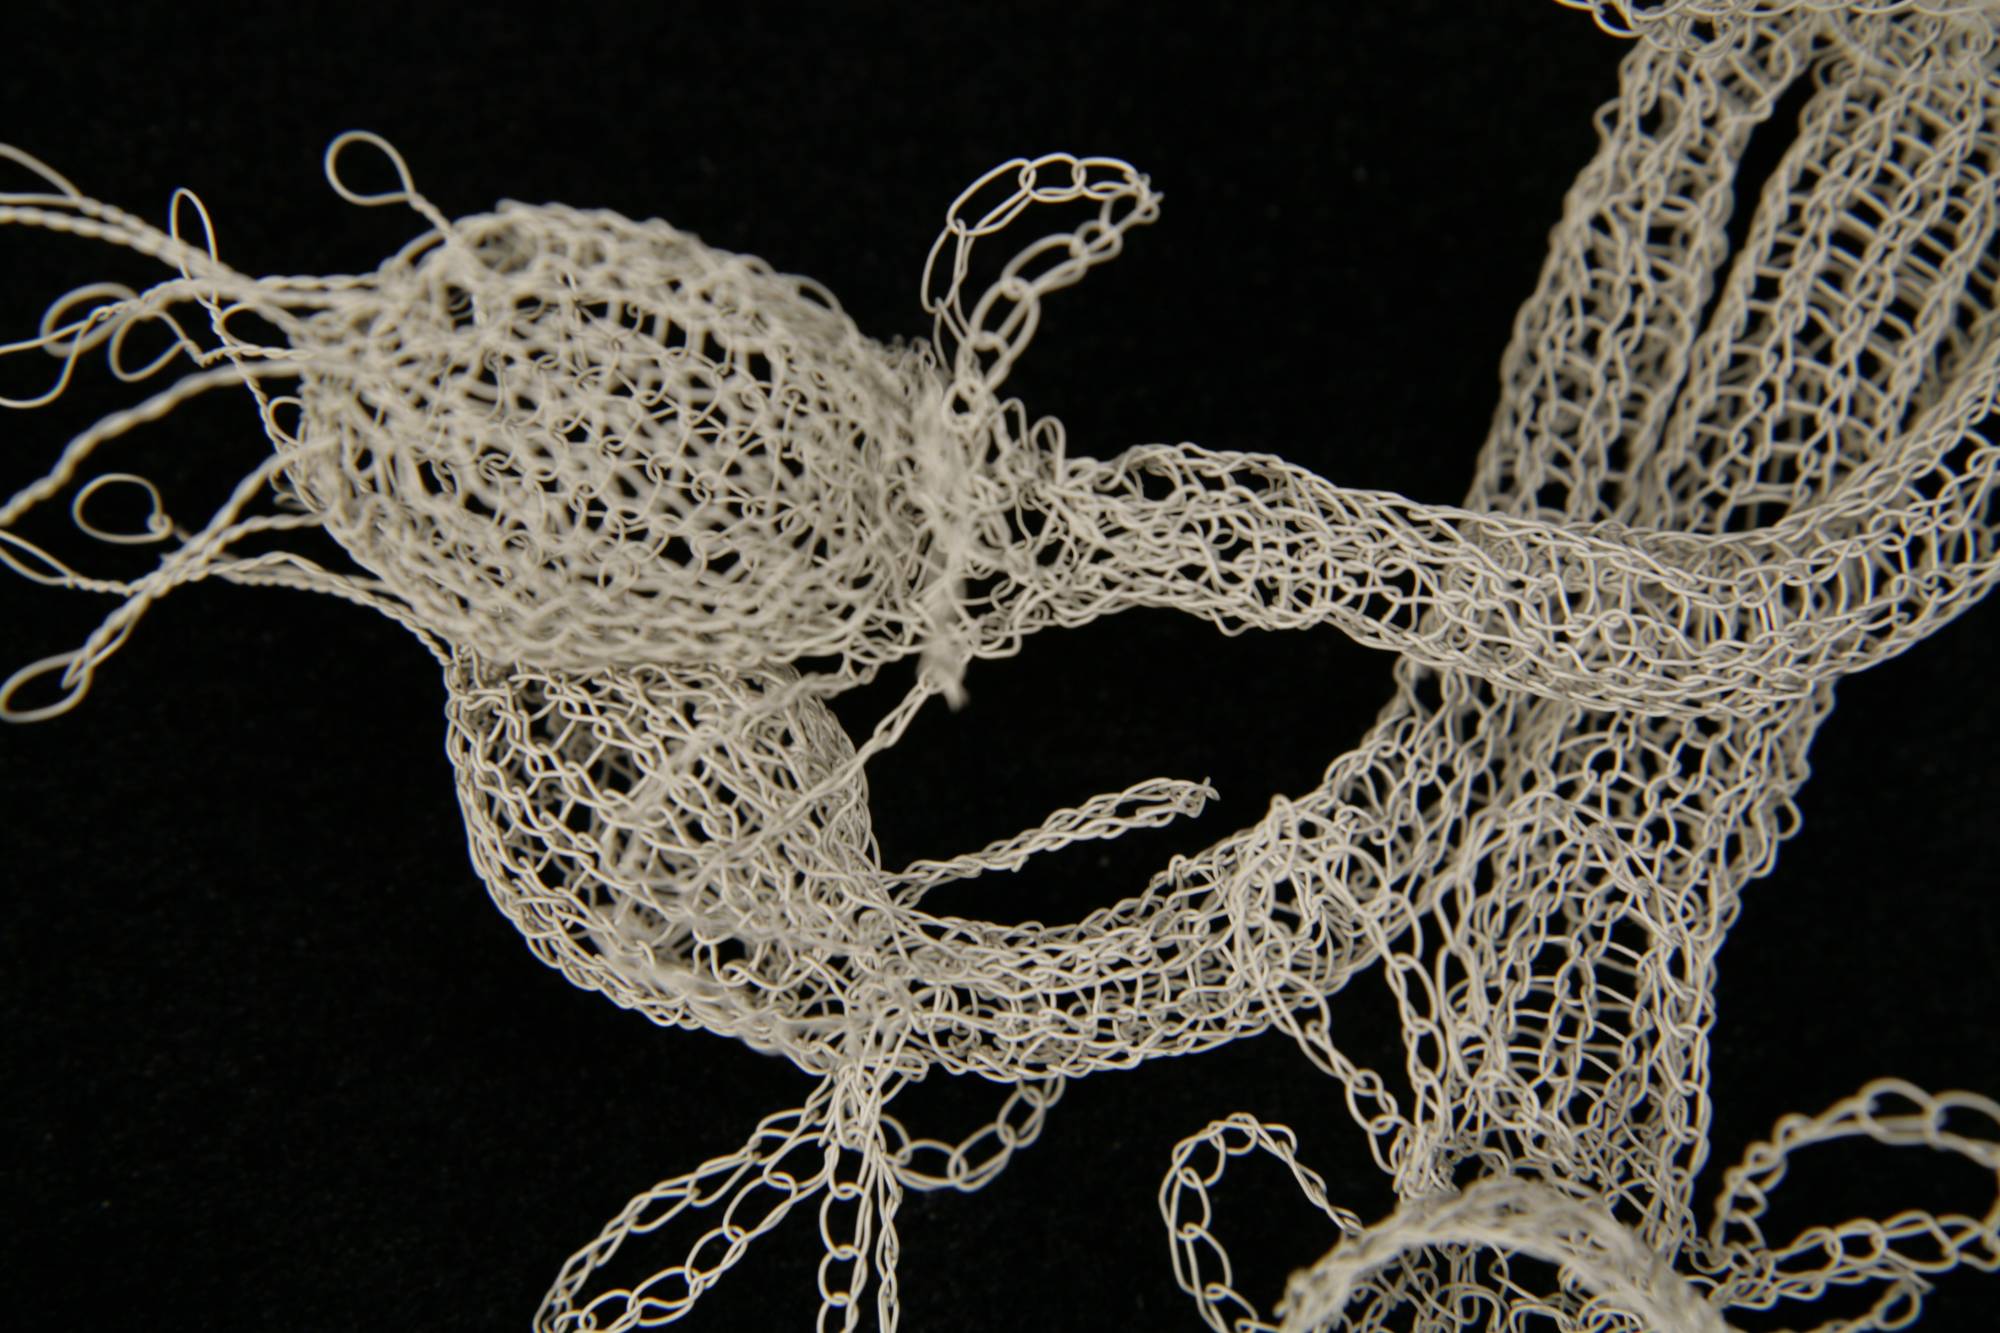 Delicate white objects knitted in wire, looks like a strange sea creature